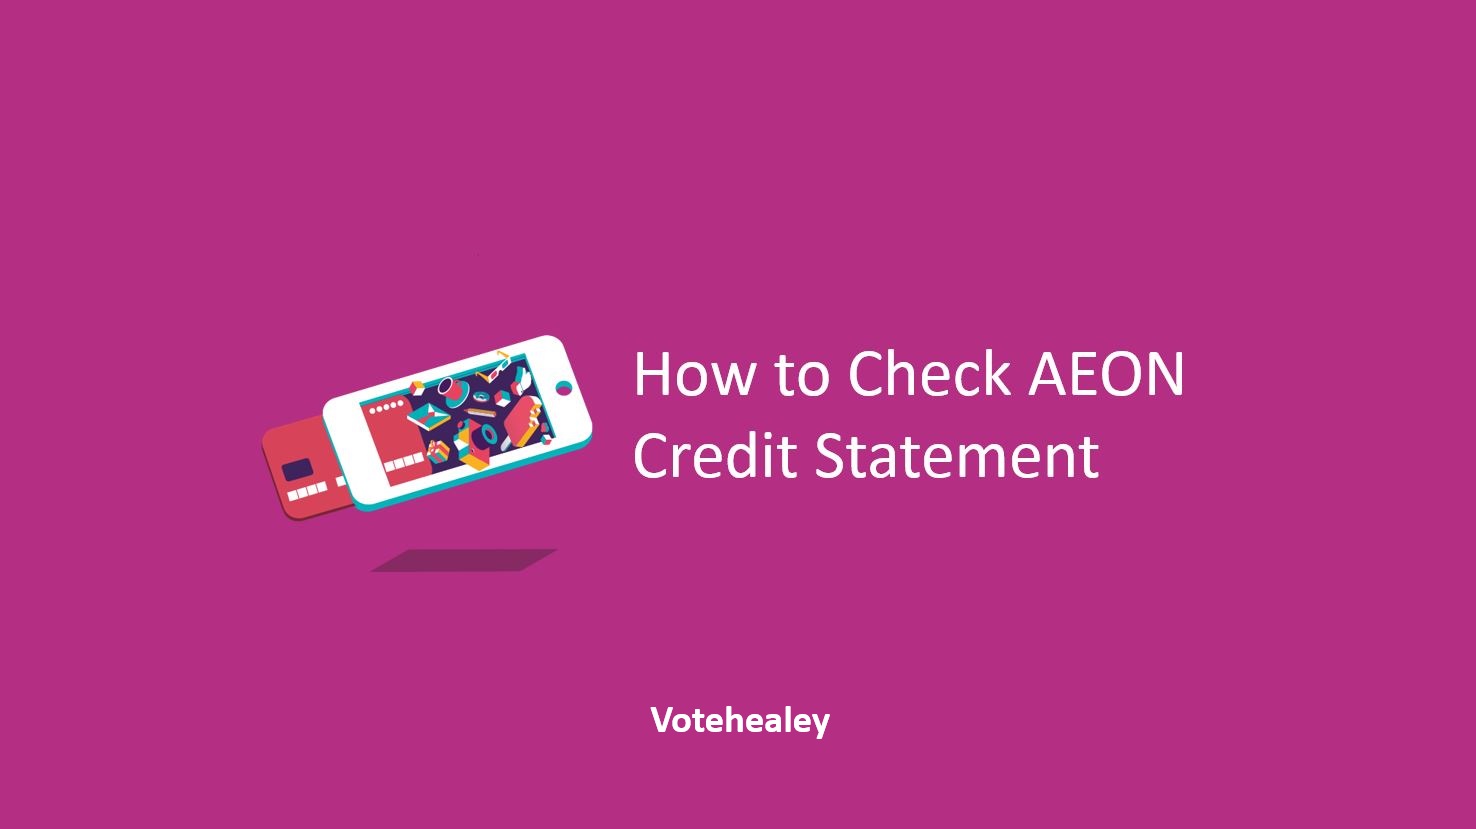 How to Check AEON Credit Statement